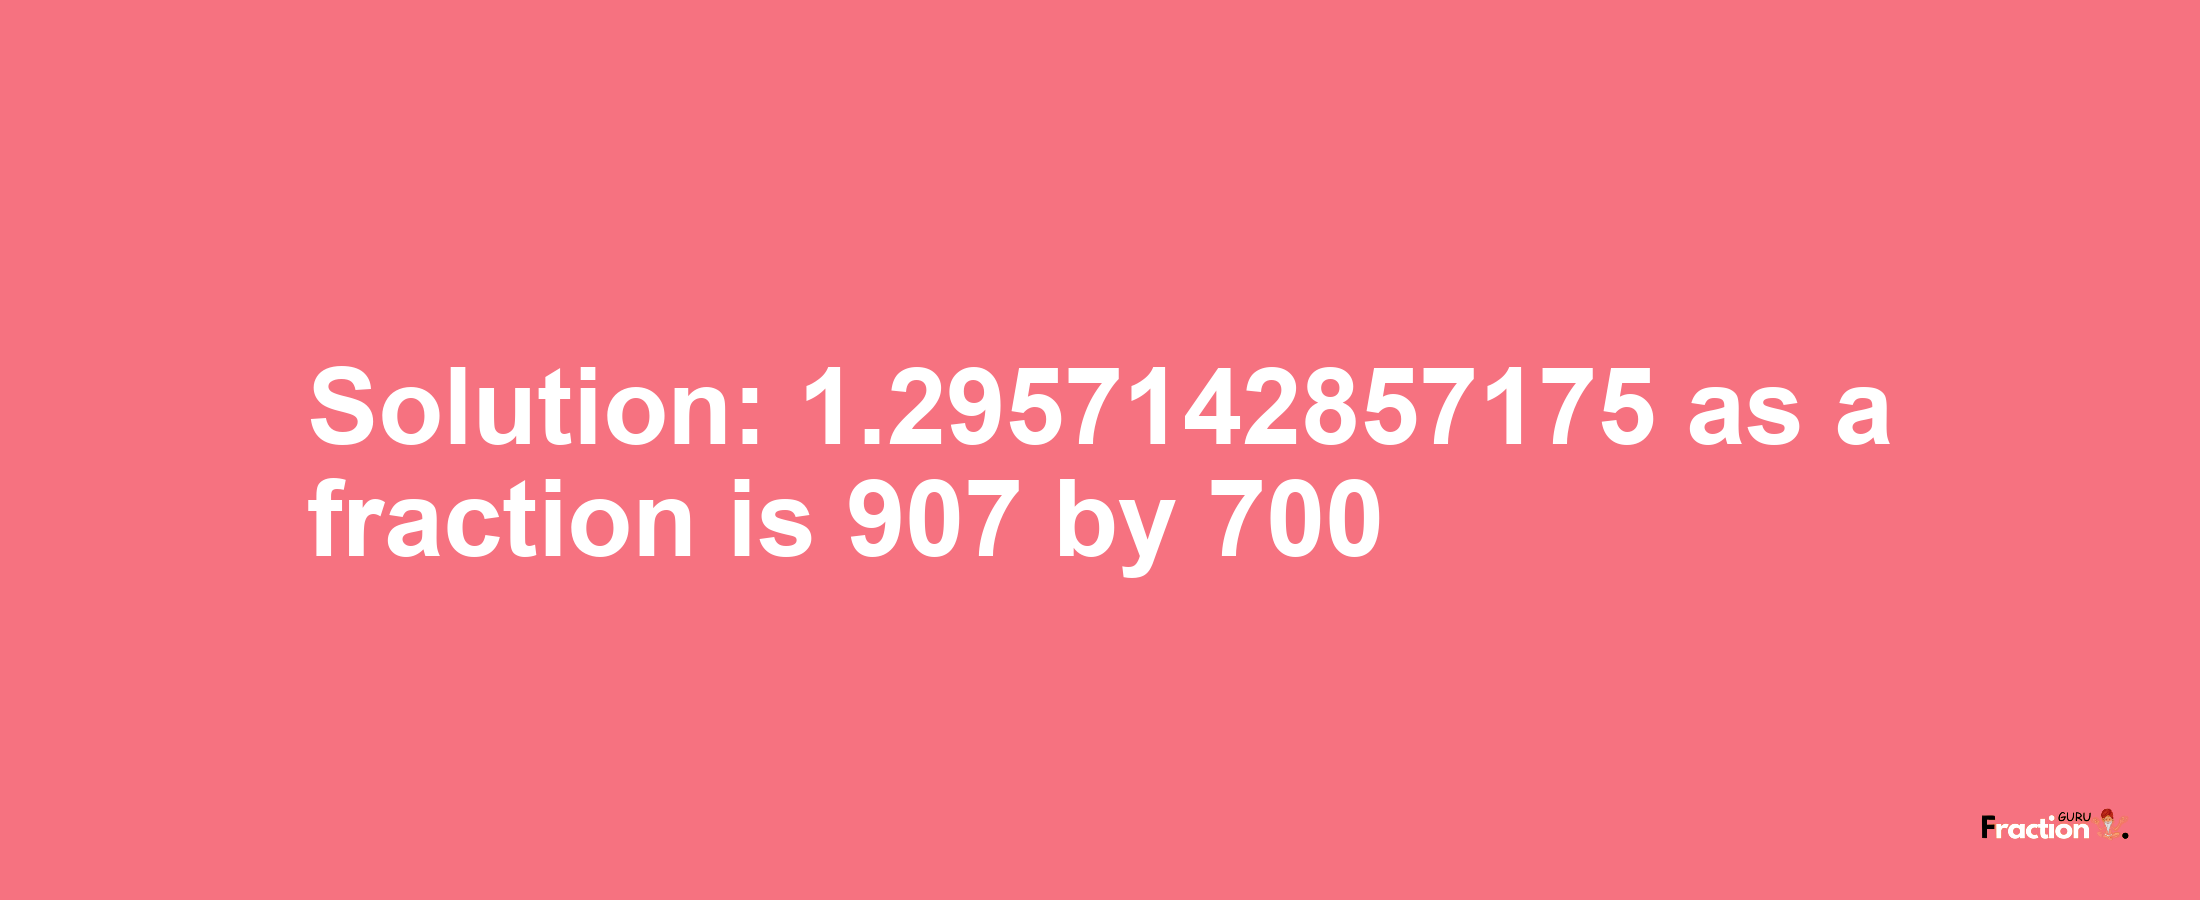 Solution:1.2957142857175 as a fraction is 907/700